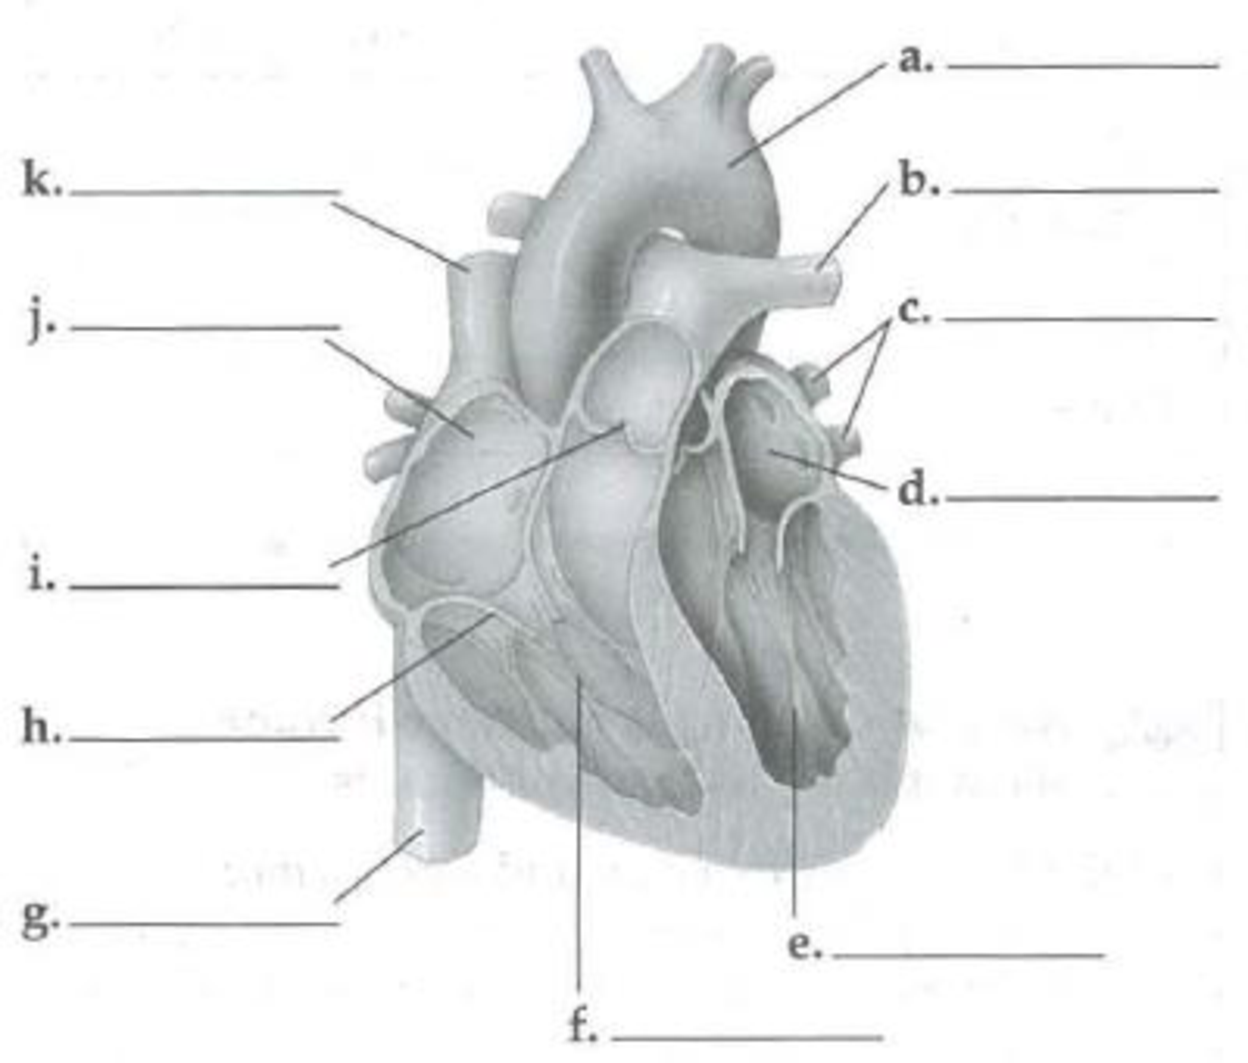 Chapter 42, Problem 1SYK, Identify the labeled structures in the following diagram of a human heart. Draw arrows to trace the 